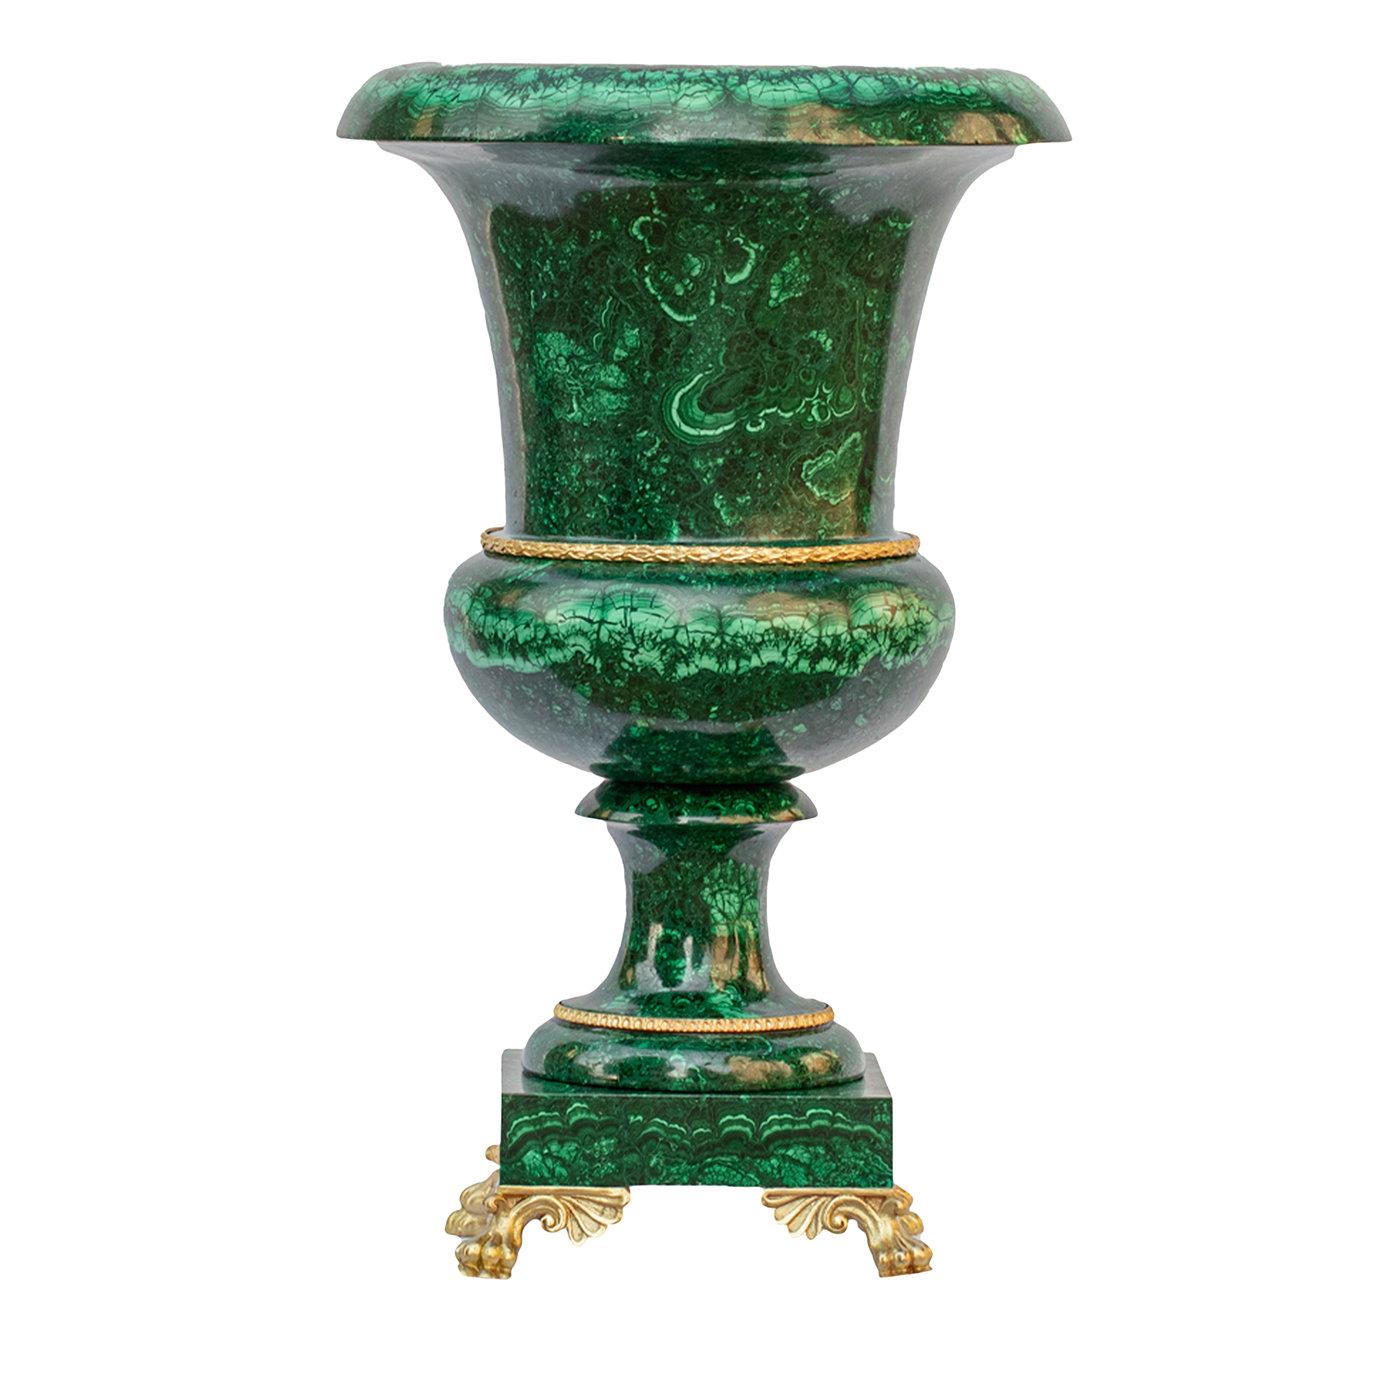 This sumptuous vase is inspired by the Medici style of Renaissance Italy. Entirely handcrafted using the mosaic technique, this one-of-a-kind piece features finely cut tesserae of silky, green-banded African malachite on a pedestal base with a